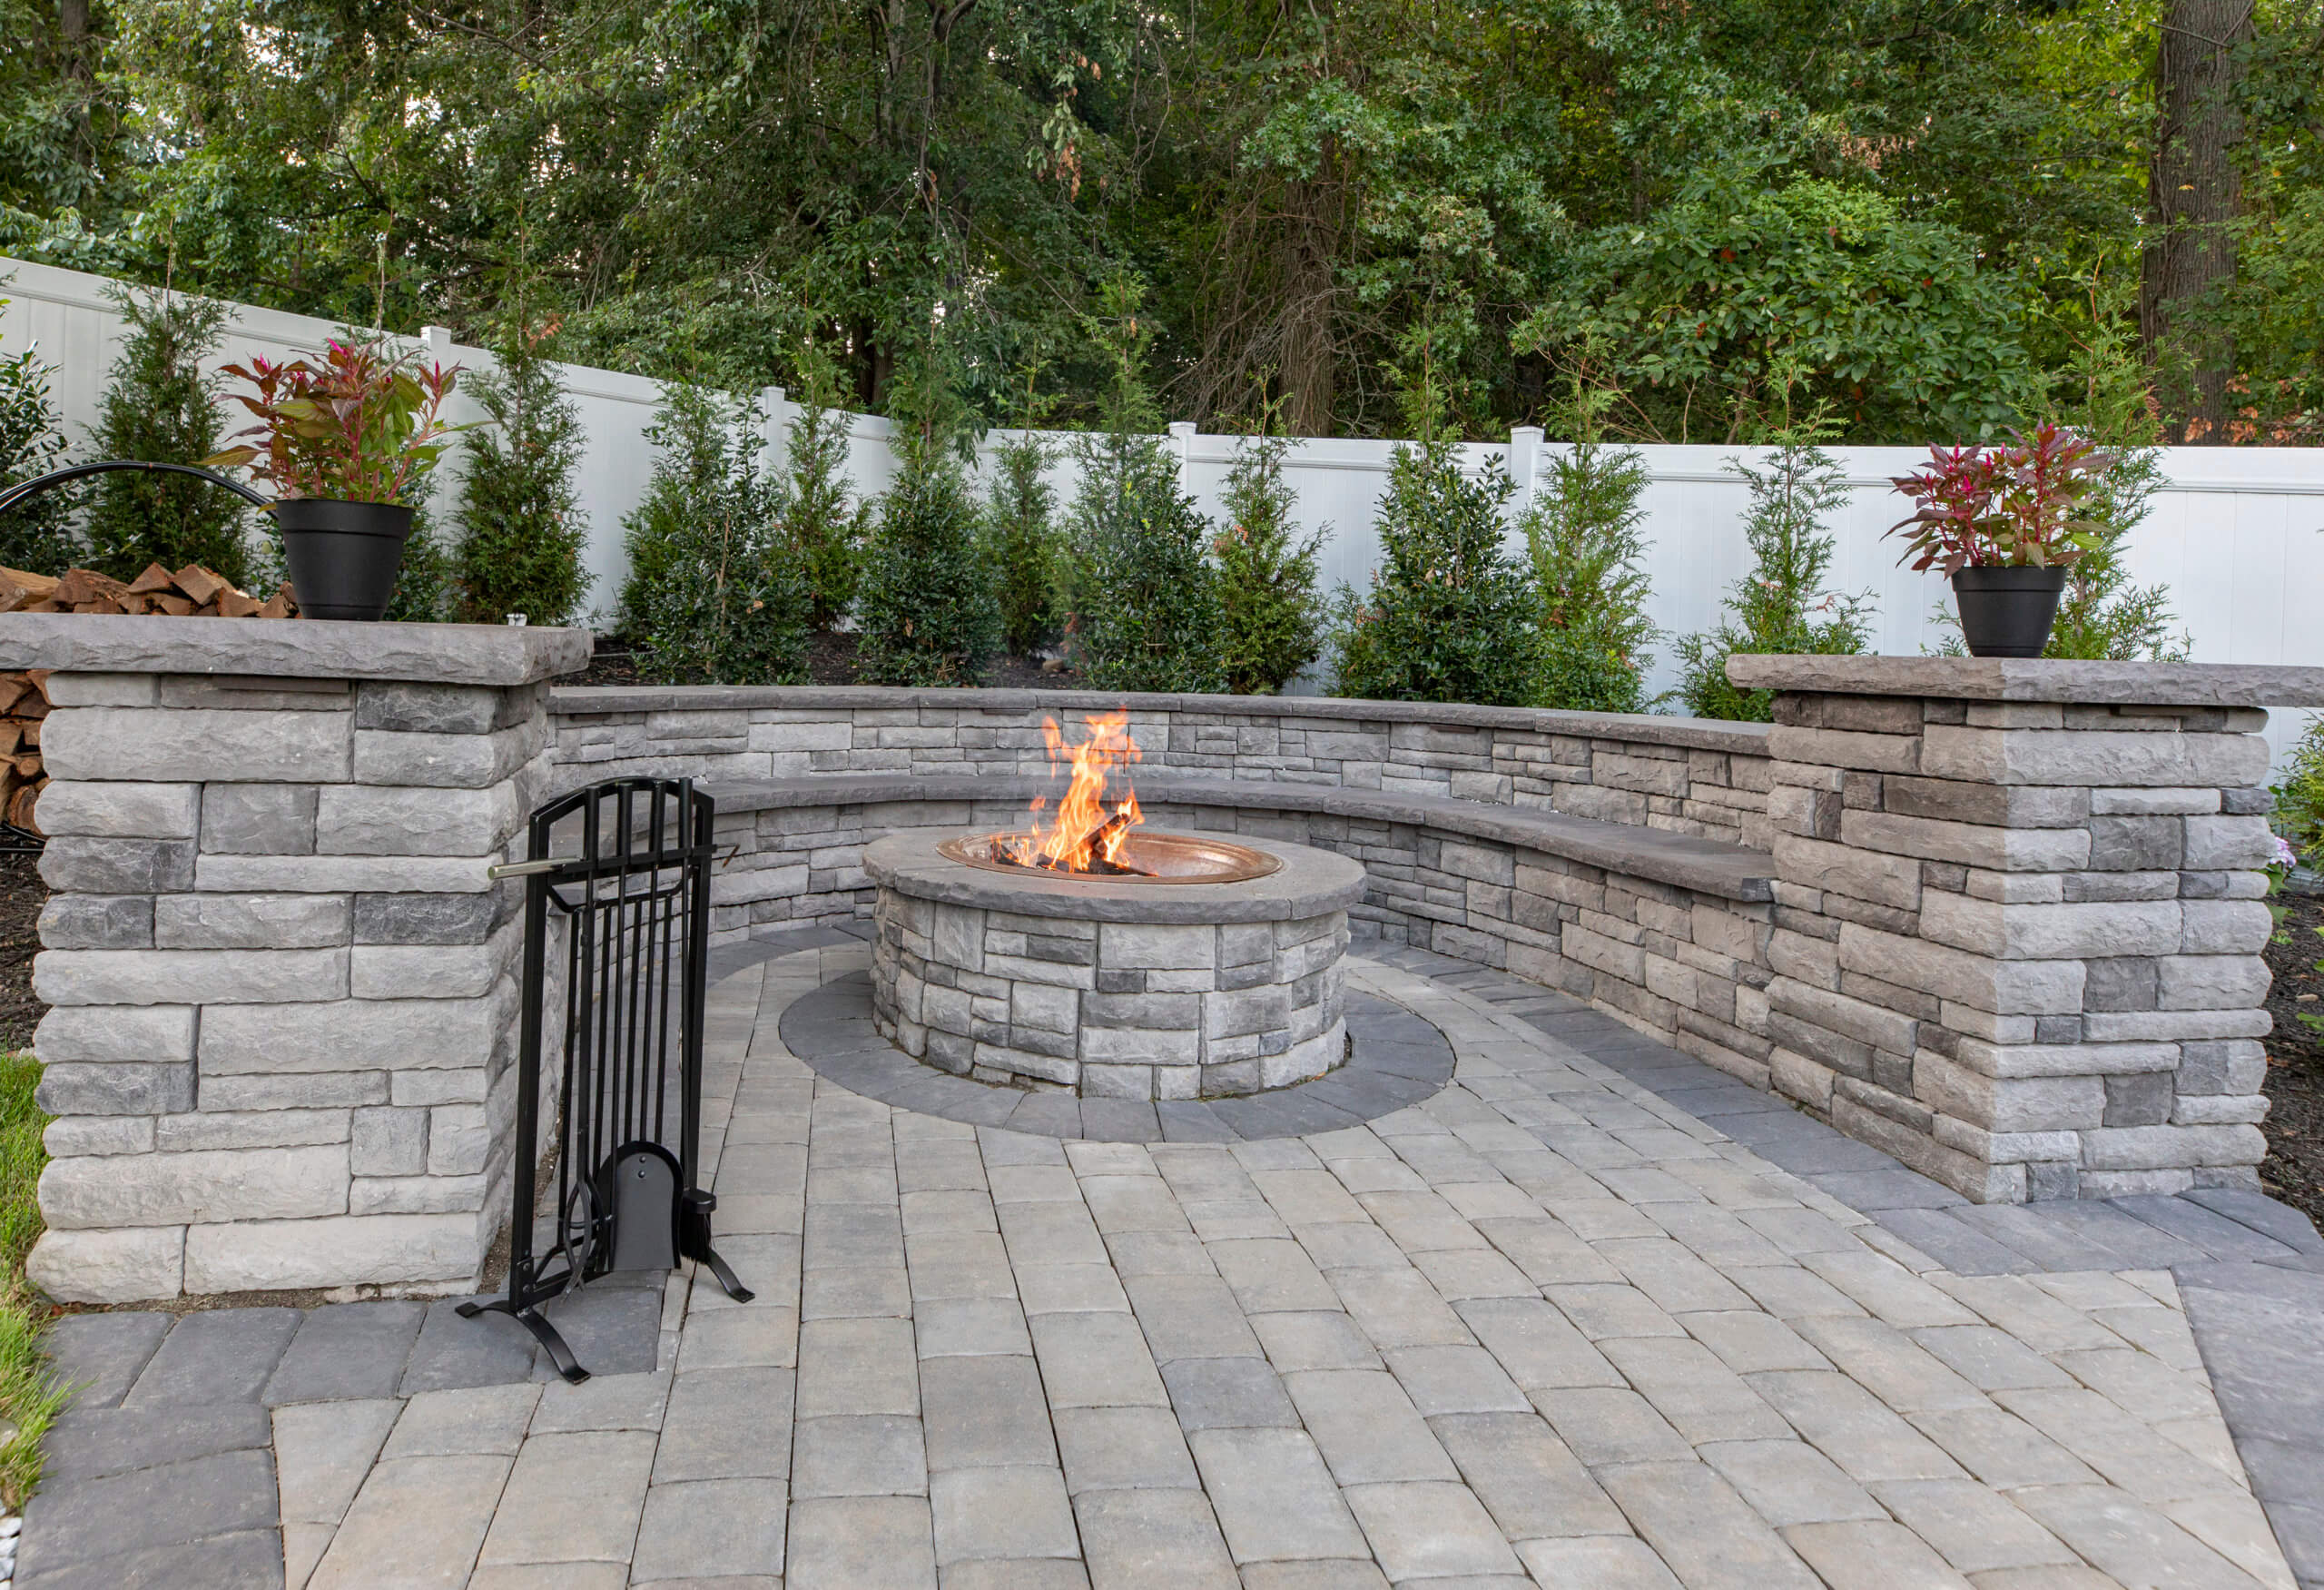 Cast Stone Wall Round Fire Pit Kit Ep, Ep Henry Fire Pit Kit Cost